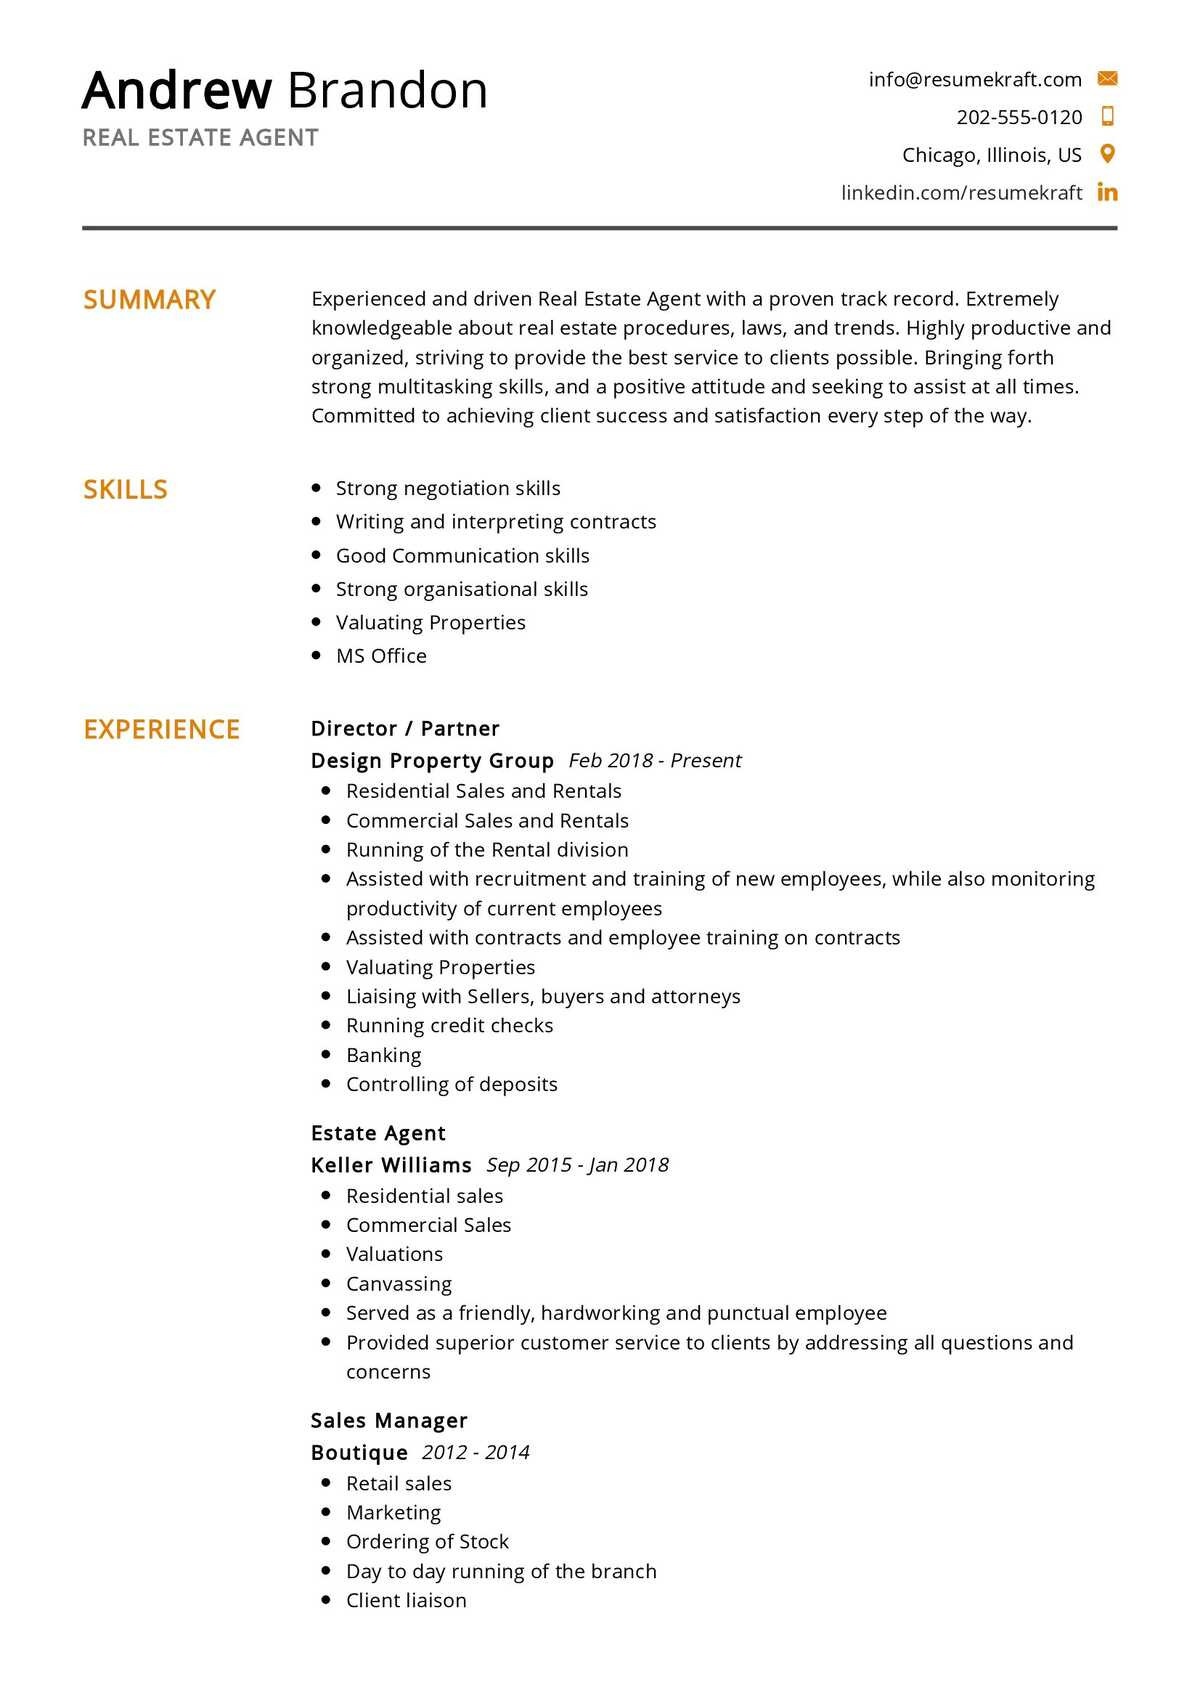 Sample Resume for Real Estate Agent with No Experience Real Estate Agent Resume Sample 2021 Writing Tips – Resumekraft